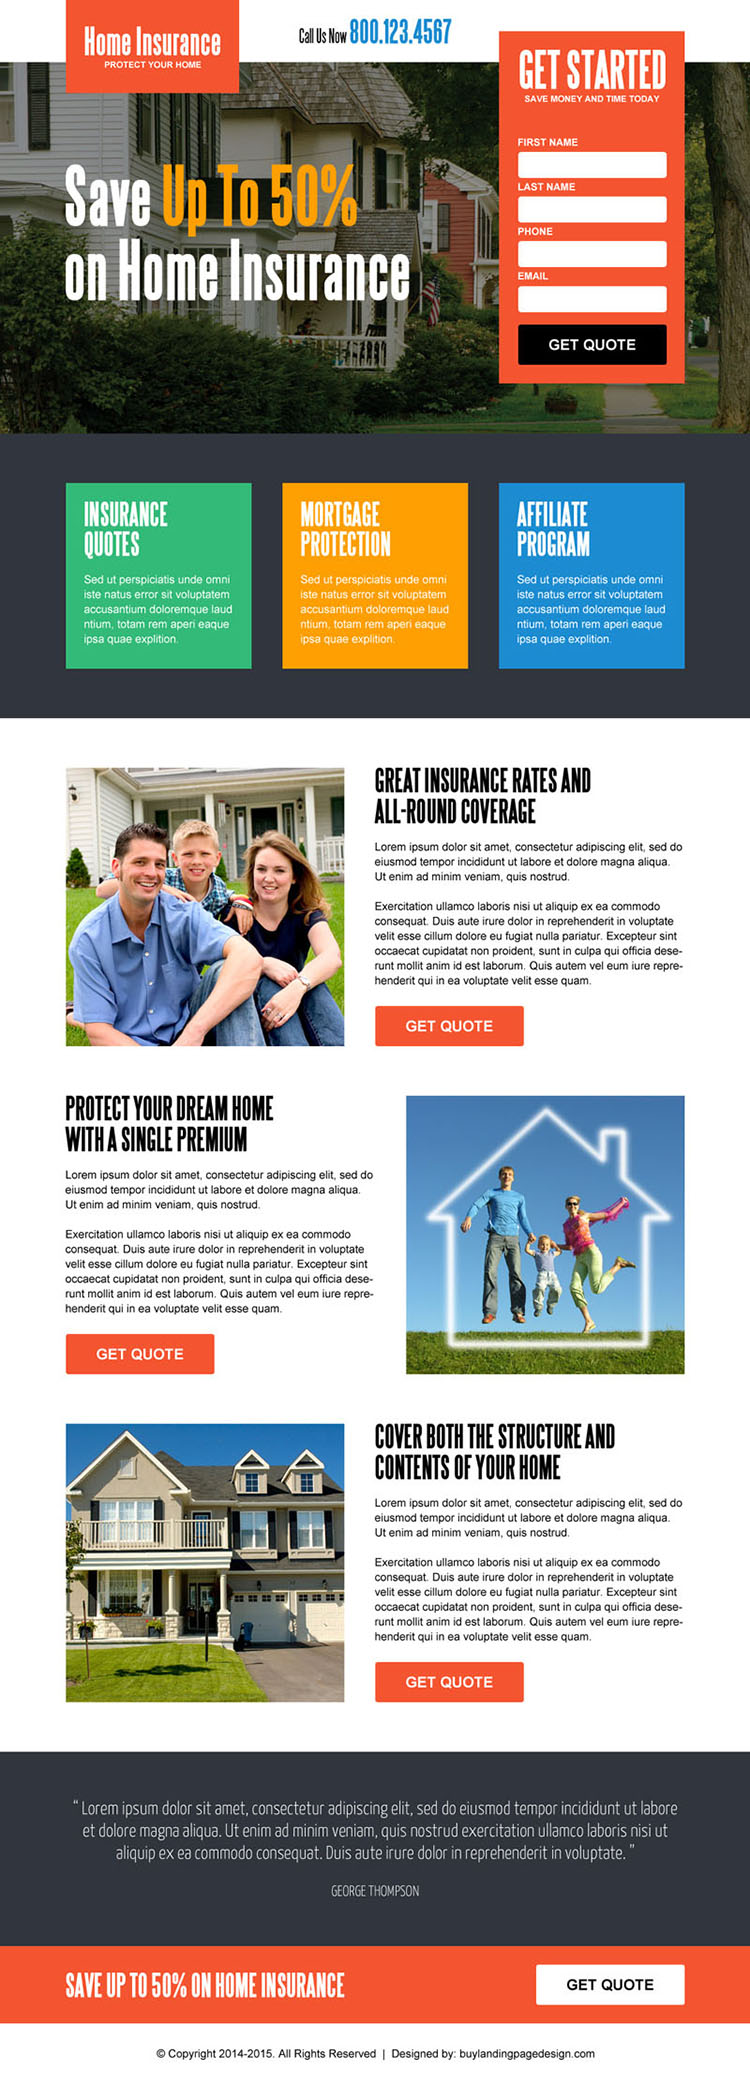 save money on home insurance lead generating responsive squeeze page design